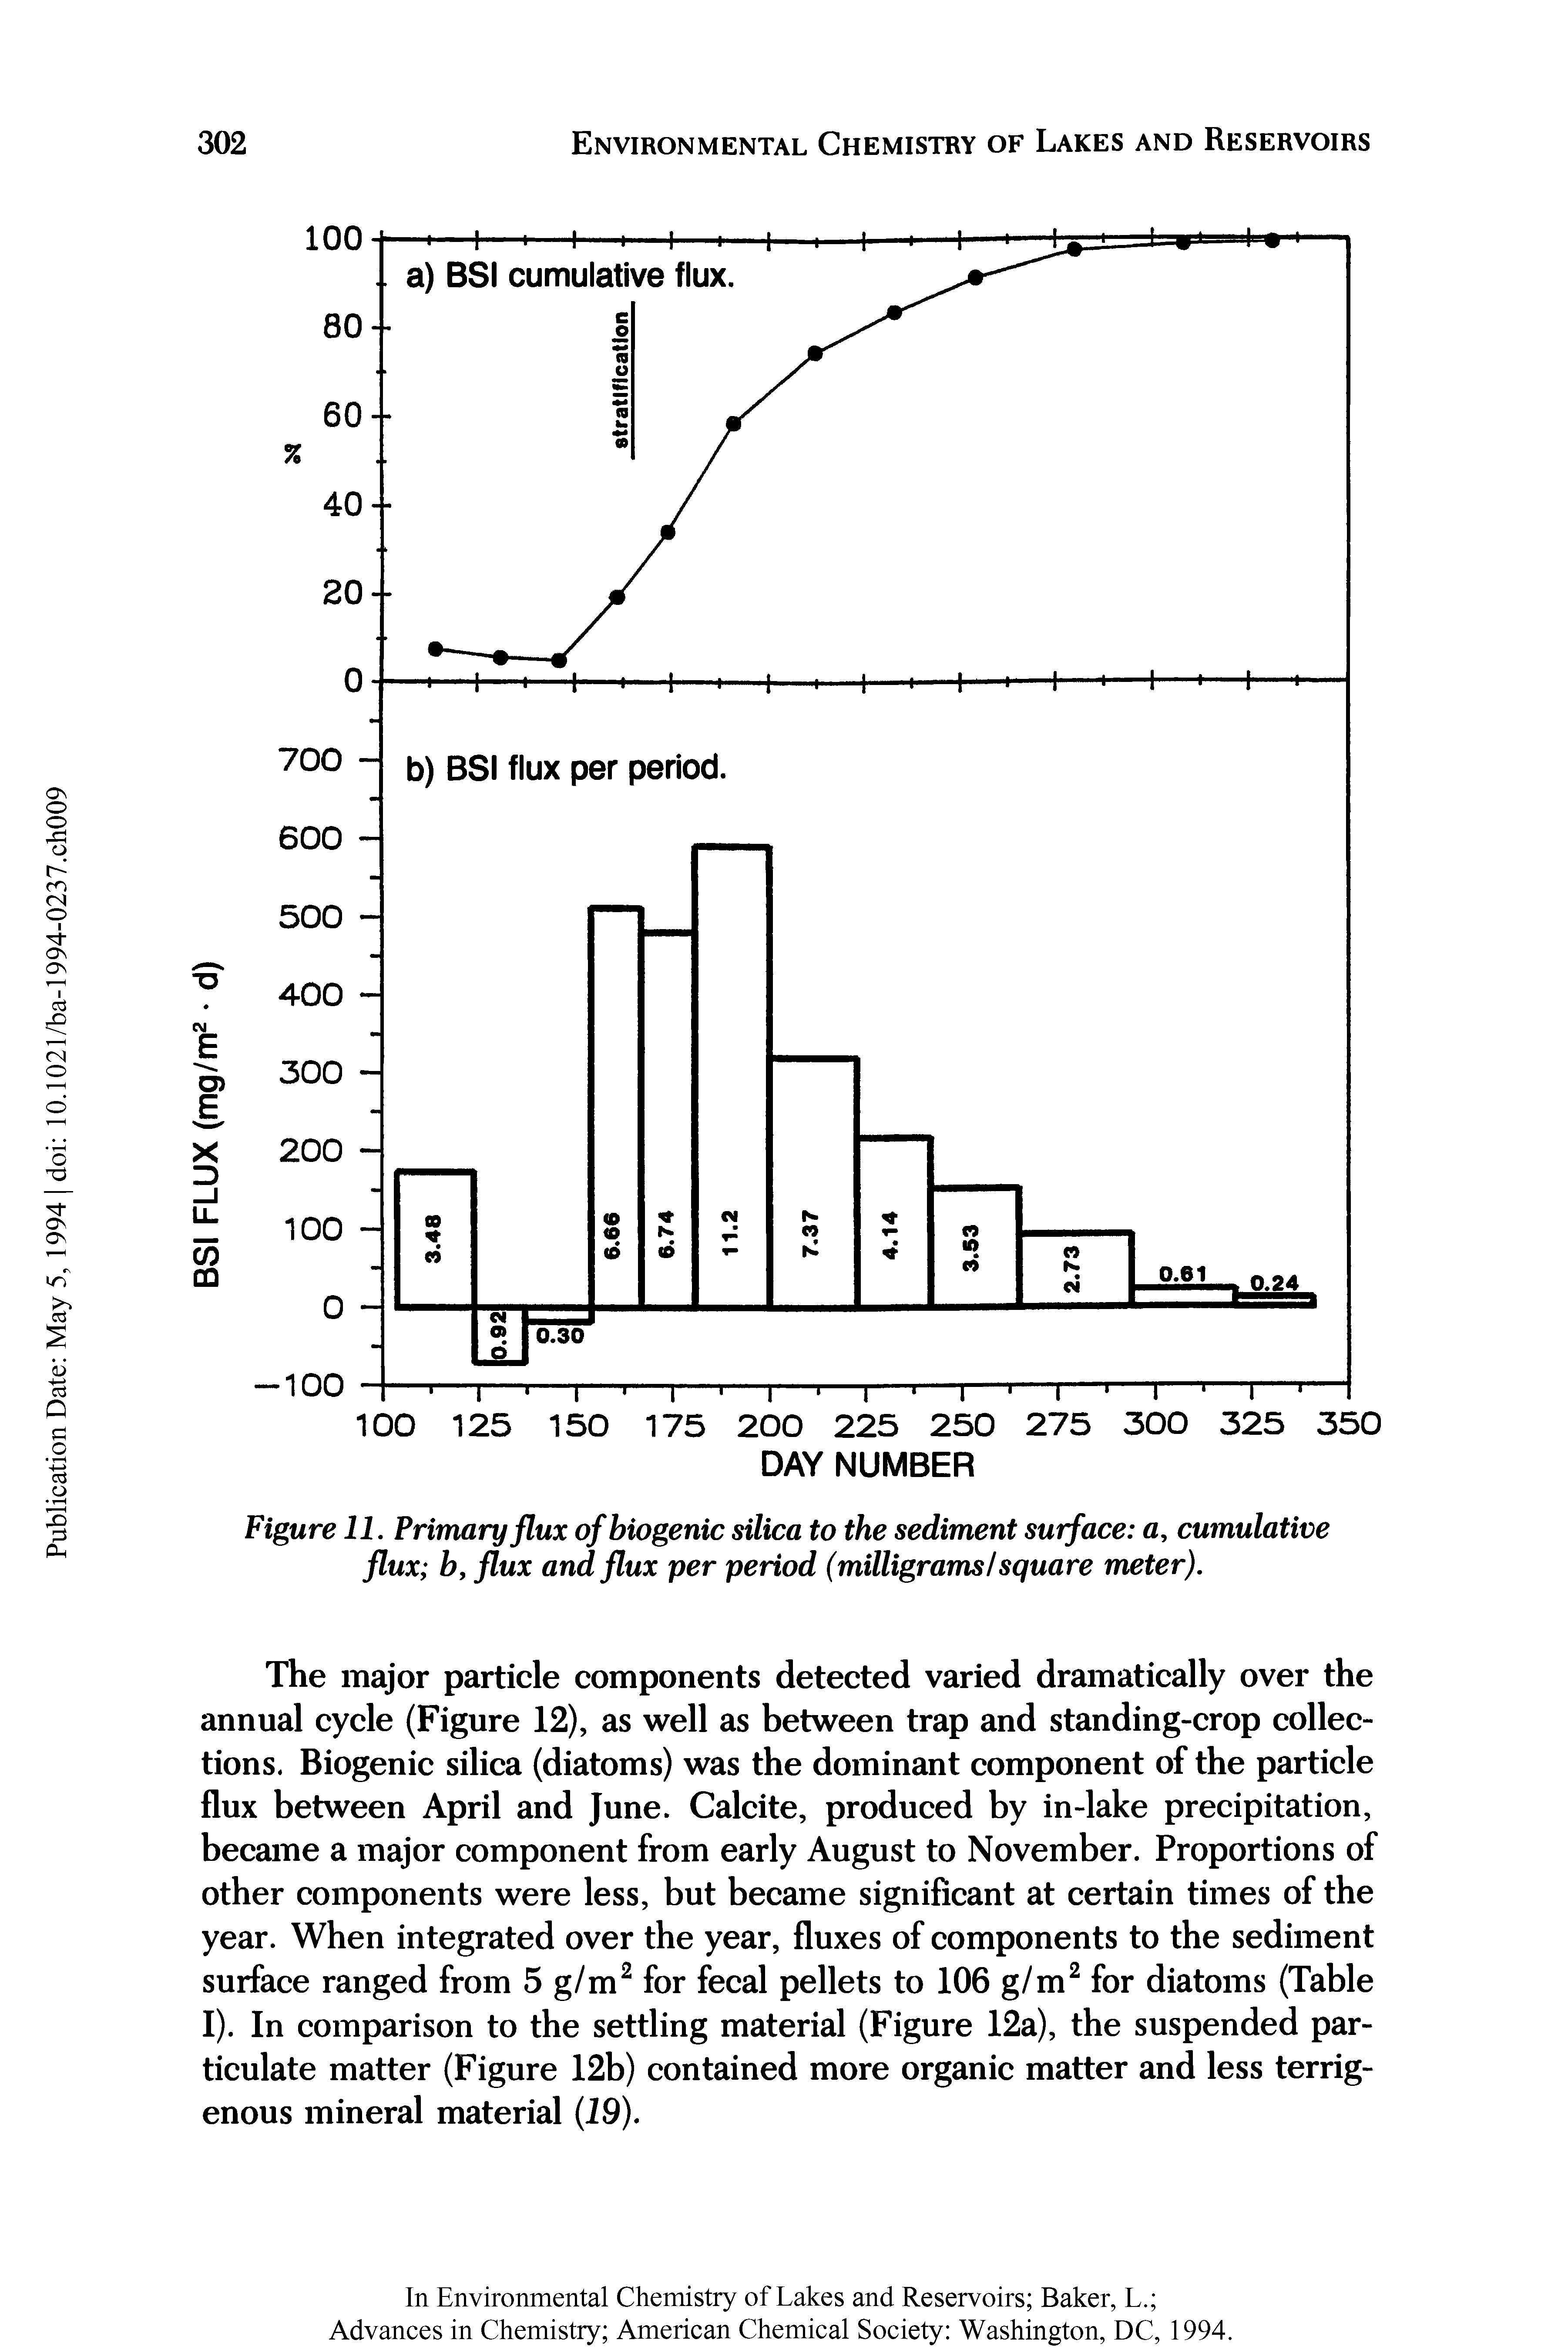 Figure 11. Primary flux of biogenic silica to the sediment surface a, cumulative flux b, flux and flux per period (milligrams/square meter).